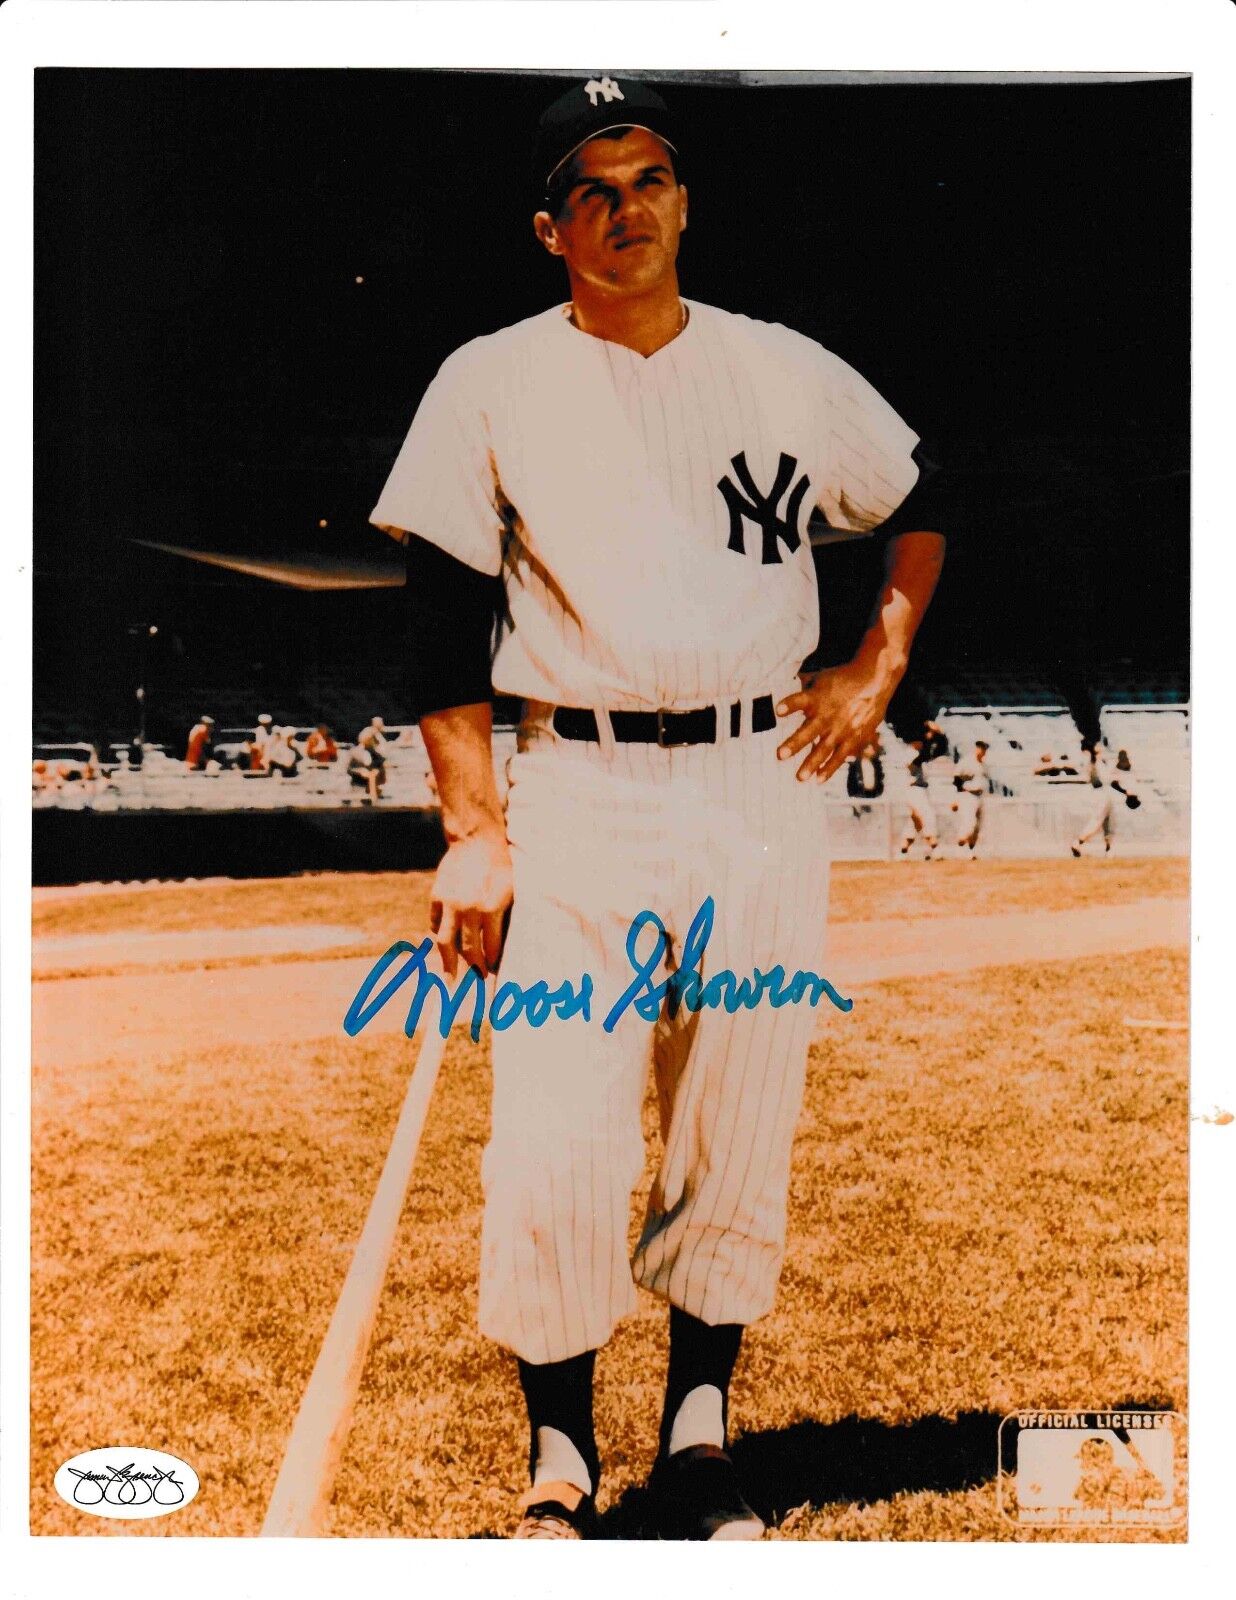 Moose Skowron Signed Autograph 8x10 Photo James Spence Sticker of Approval NY